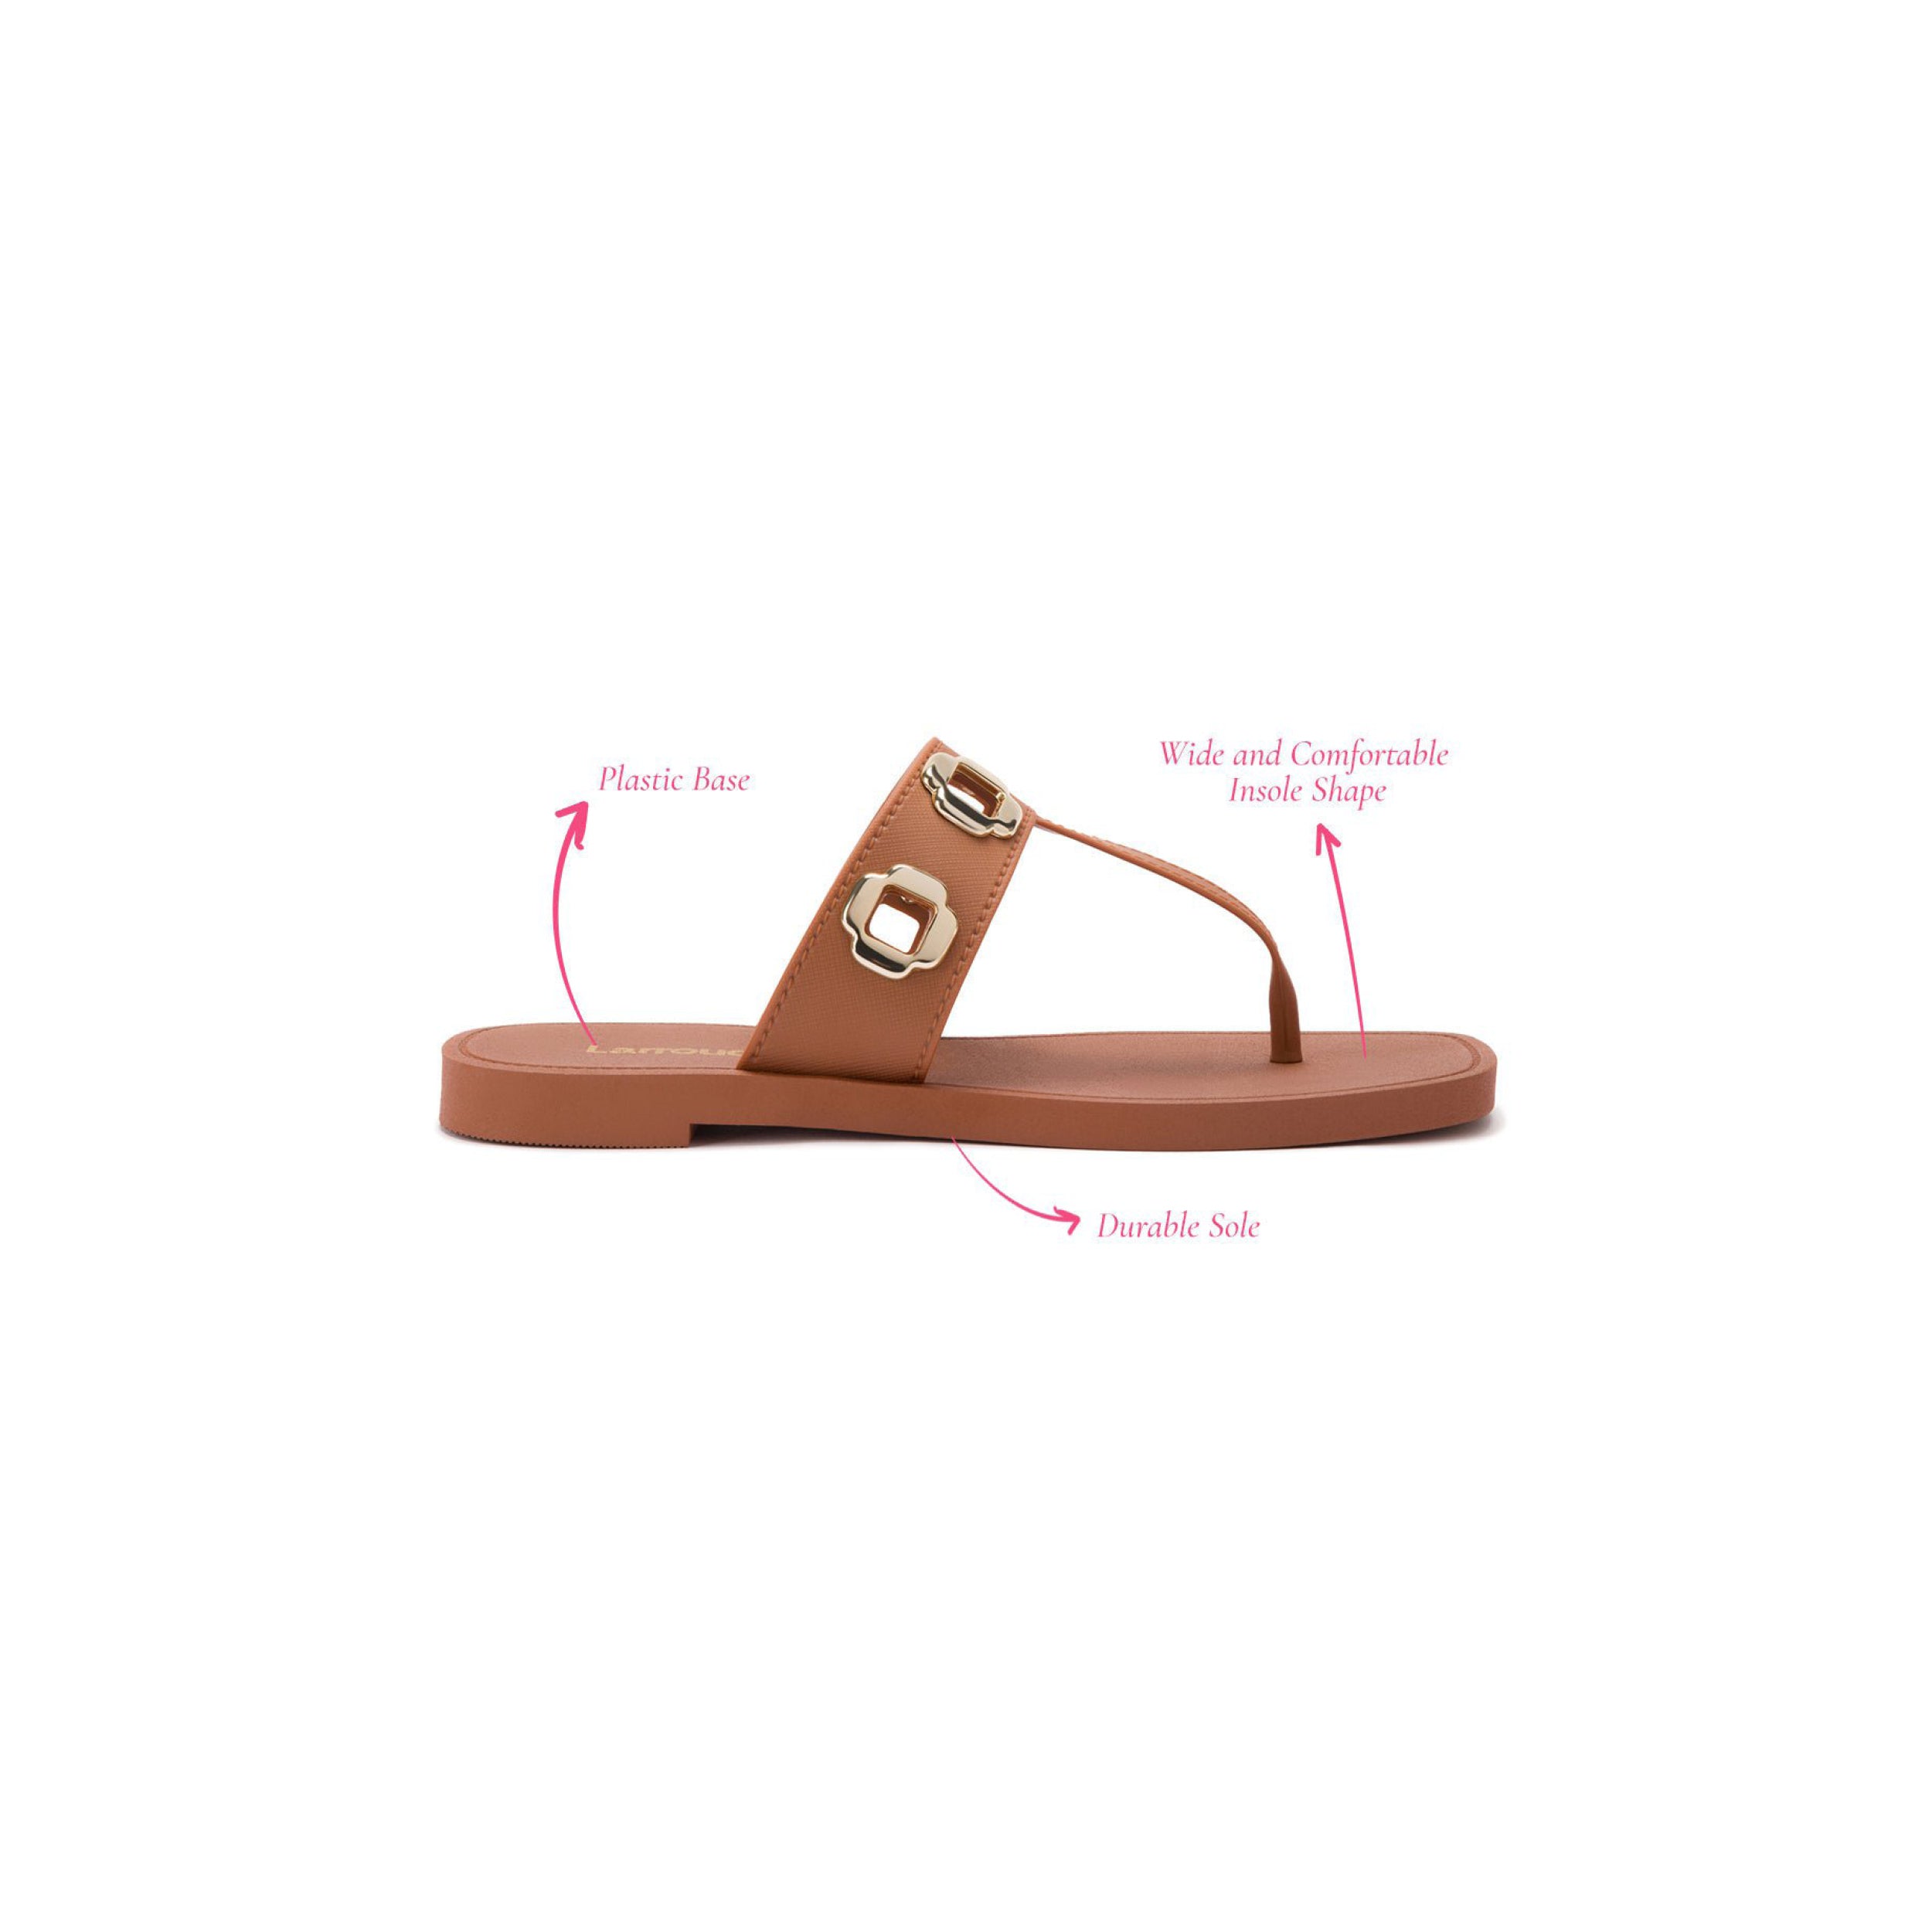 The Milan S In Caramel PVC is a brown flat t-strap sandal with a durable sole, featuring a wide and comfortable insole shape. It has a plastic base and two gold-tone buckle straps across the top. The sandal showcases a classic silhouette, with the heel positioned to the left and the toe to the right when viewed from the side.